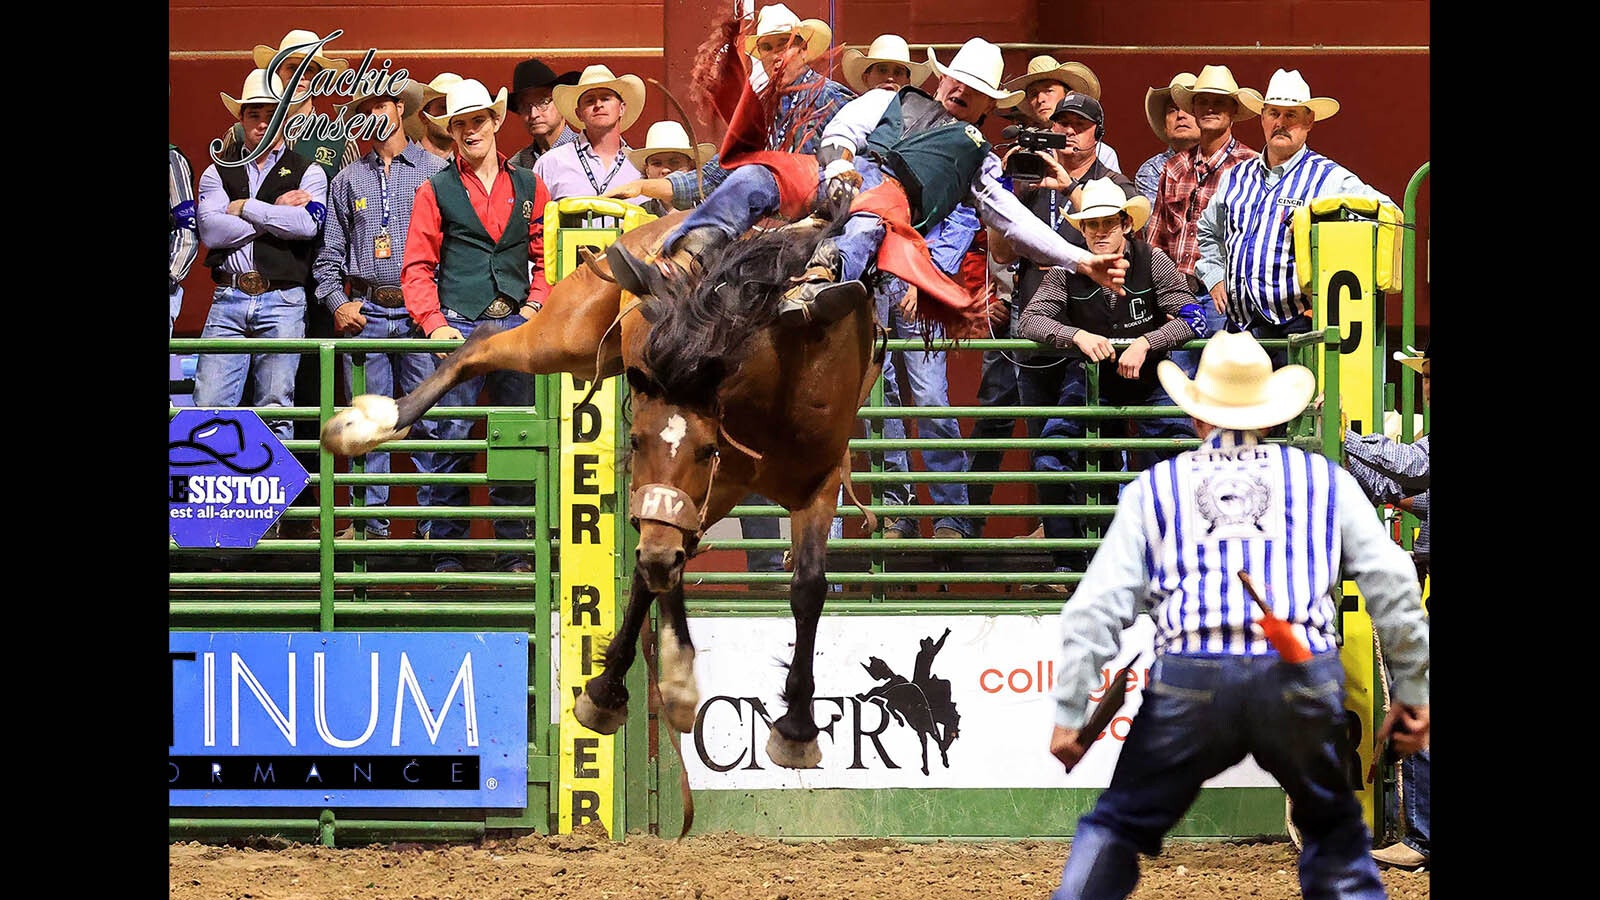 The College National Finals Rodeo is a big draw for the Ford Wyoming Center in Casper.